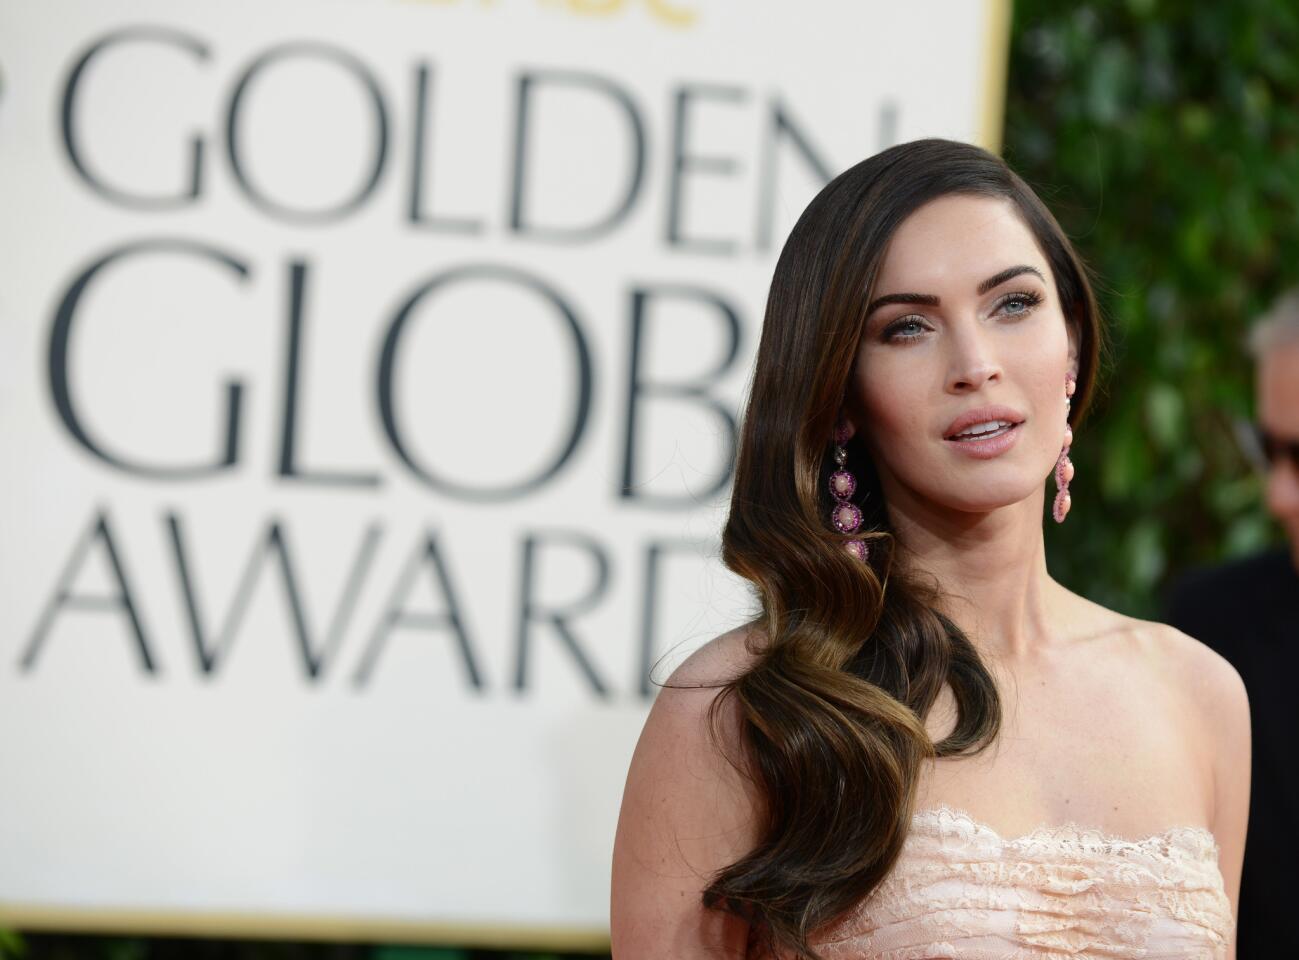 Megan Fox speaks out about speaking in tongues